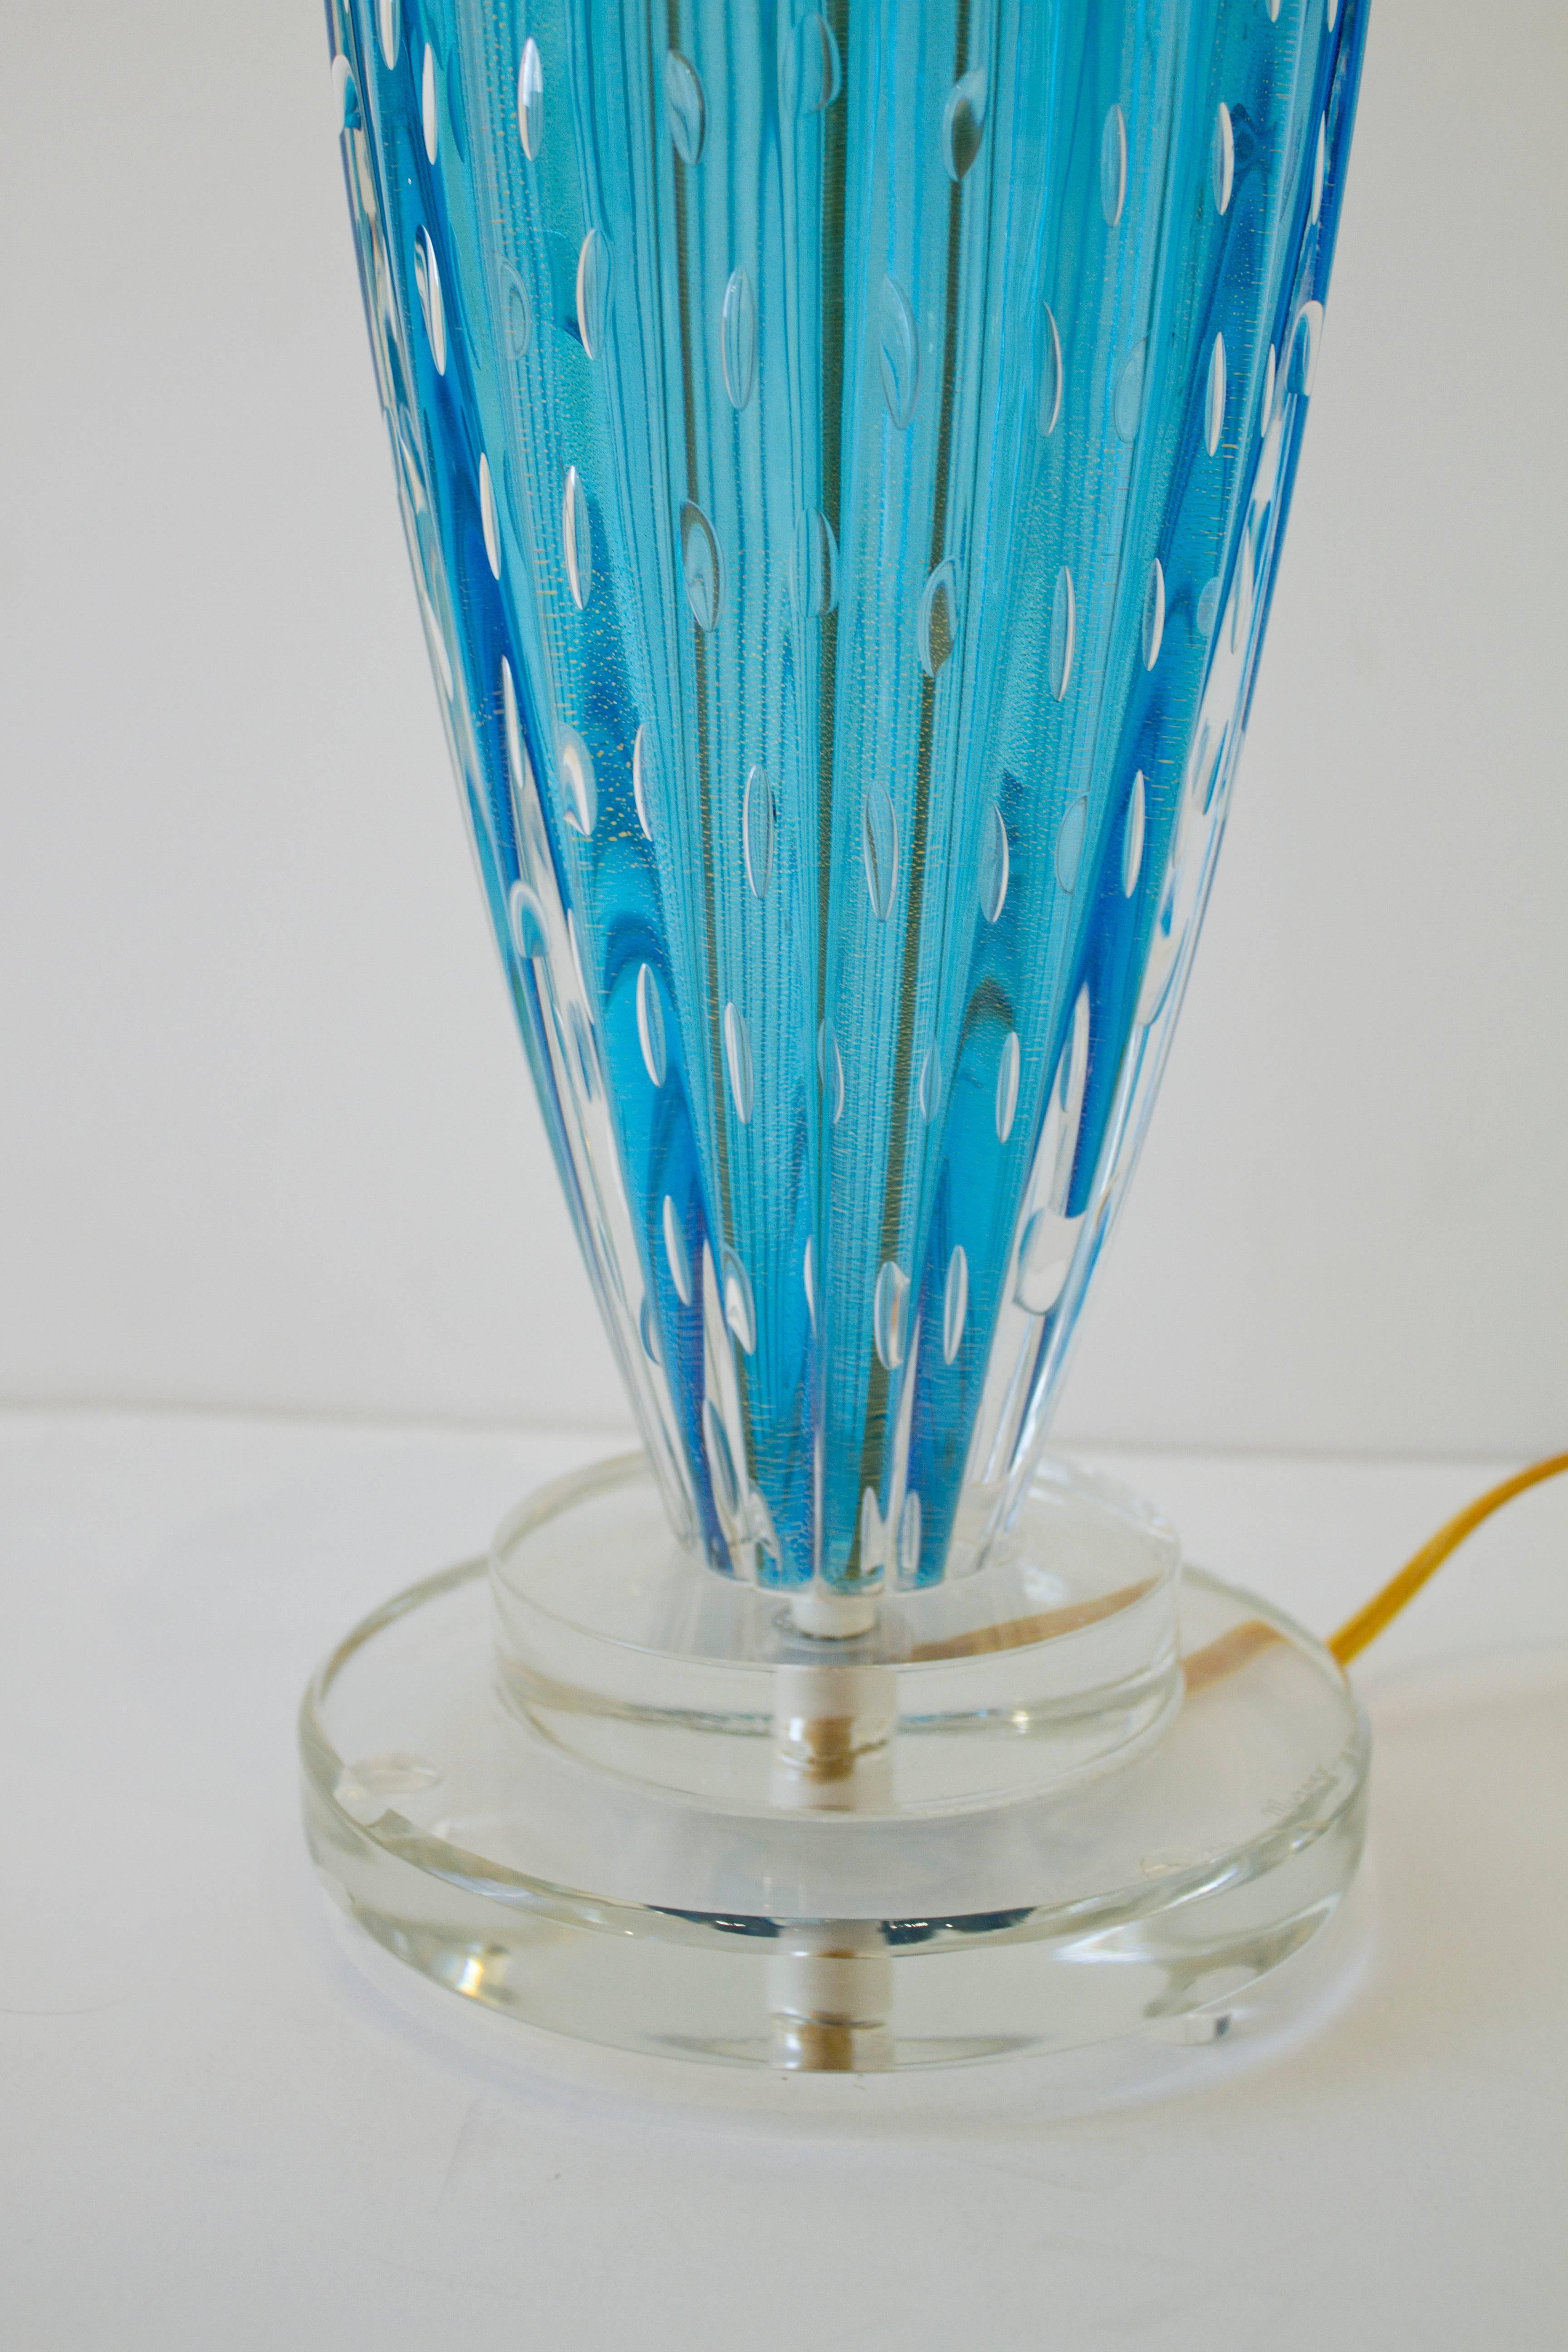 A stunning pair of hand blown aquamarine blue or blue topaz colored Murano glass lamps. These clear blue bases were hand blown using the 